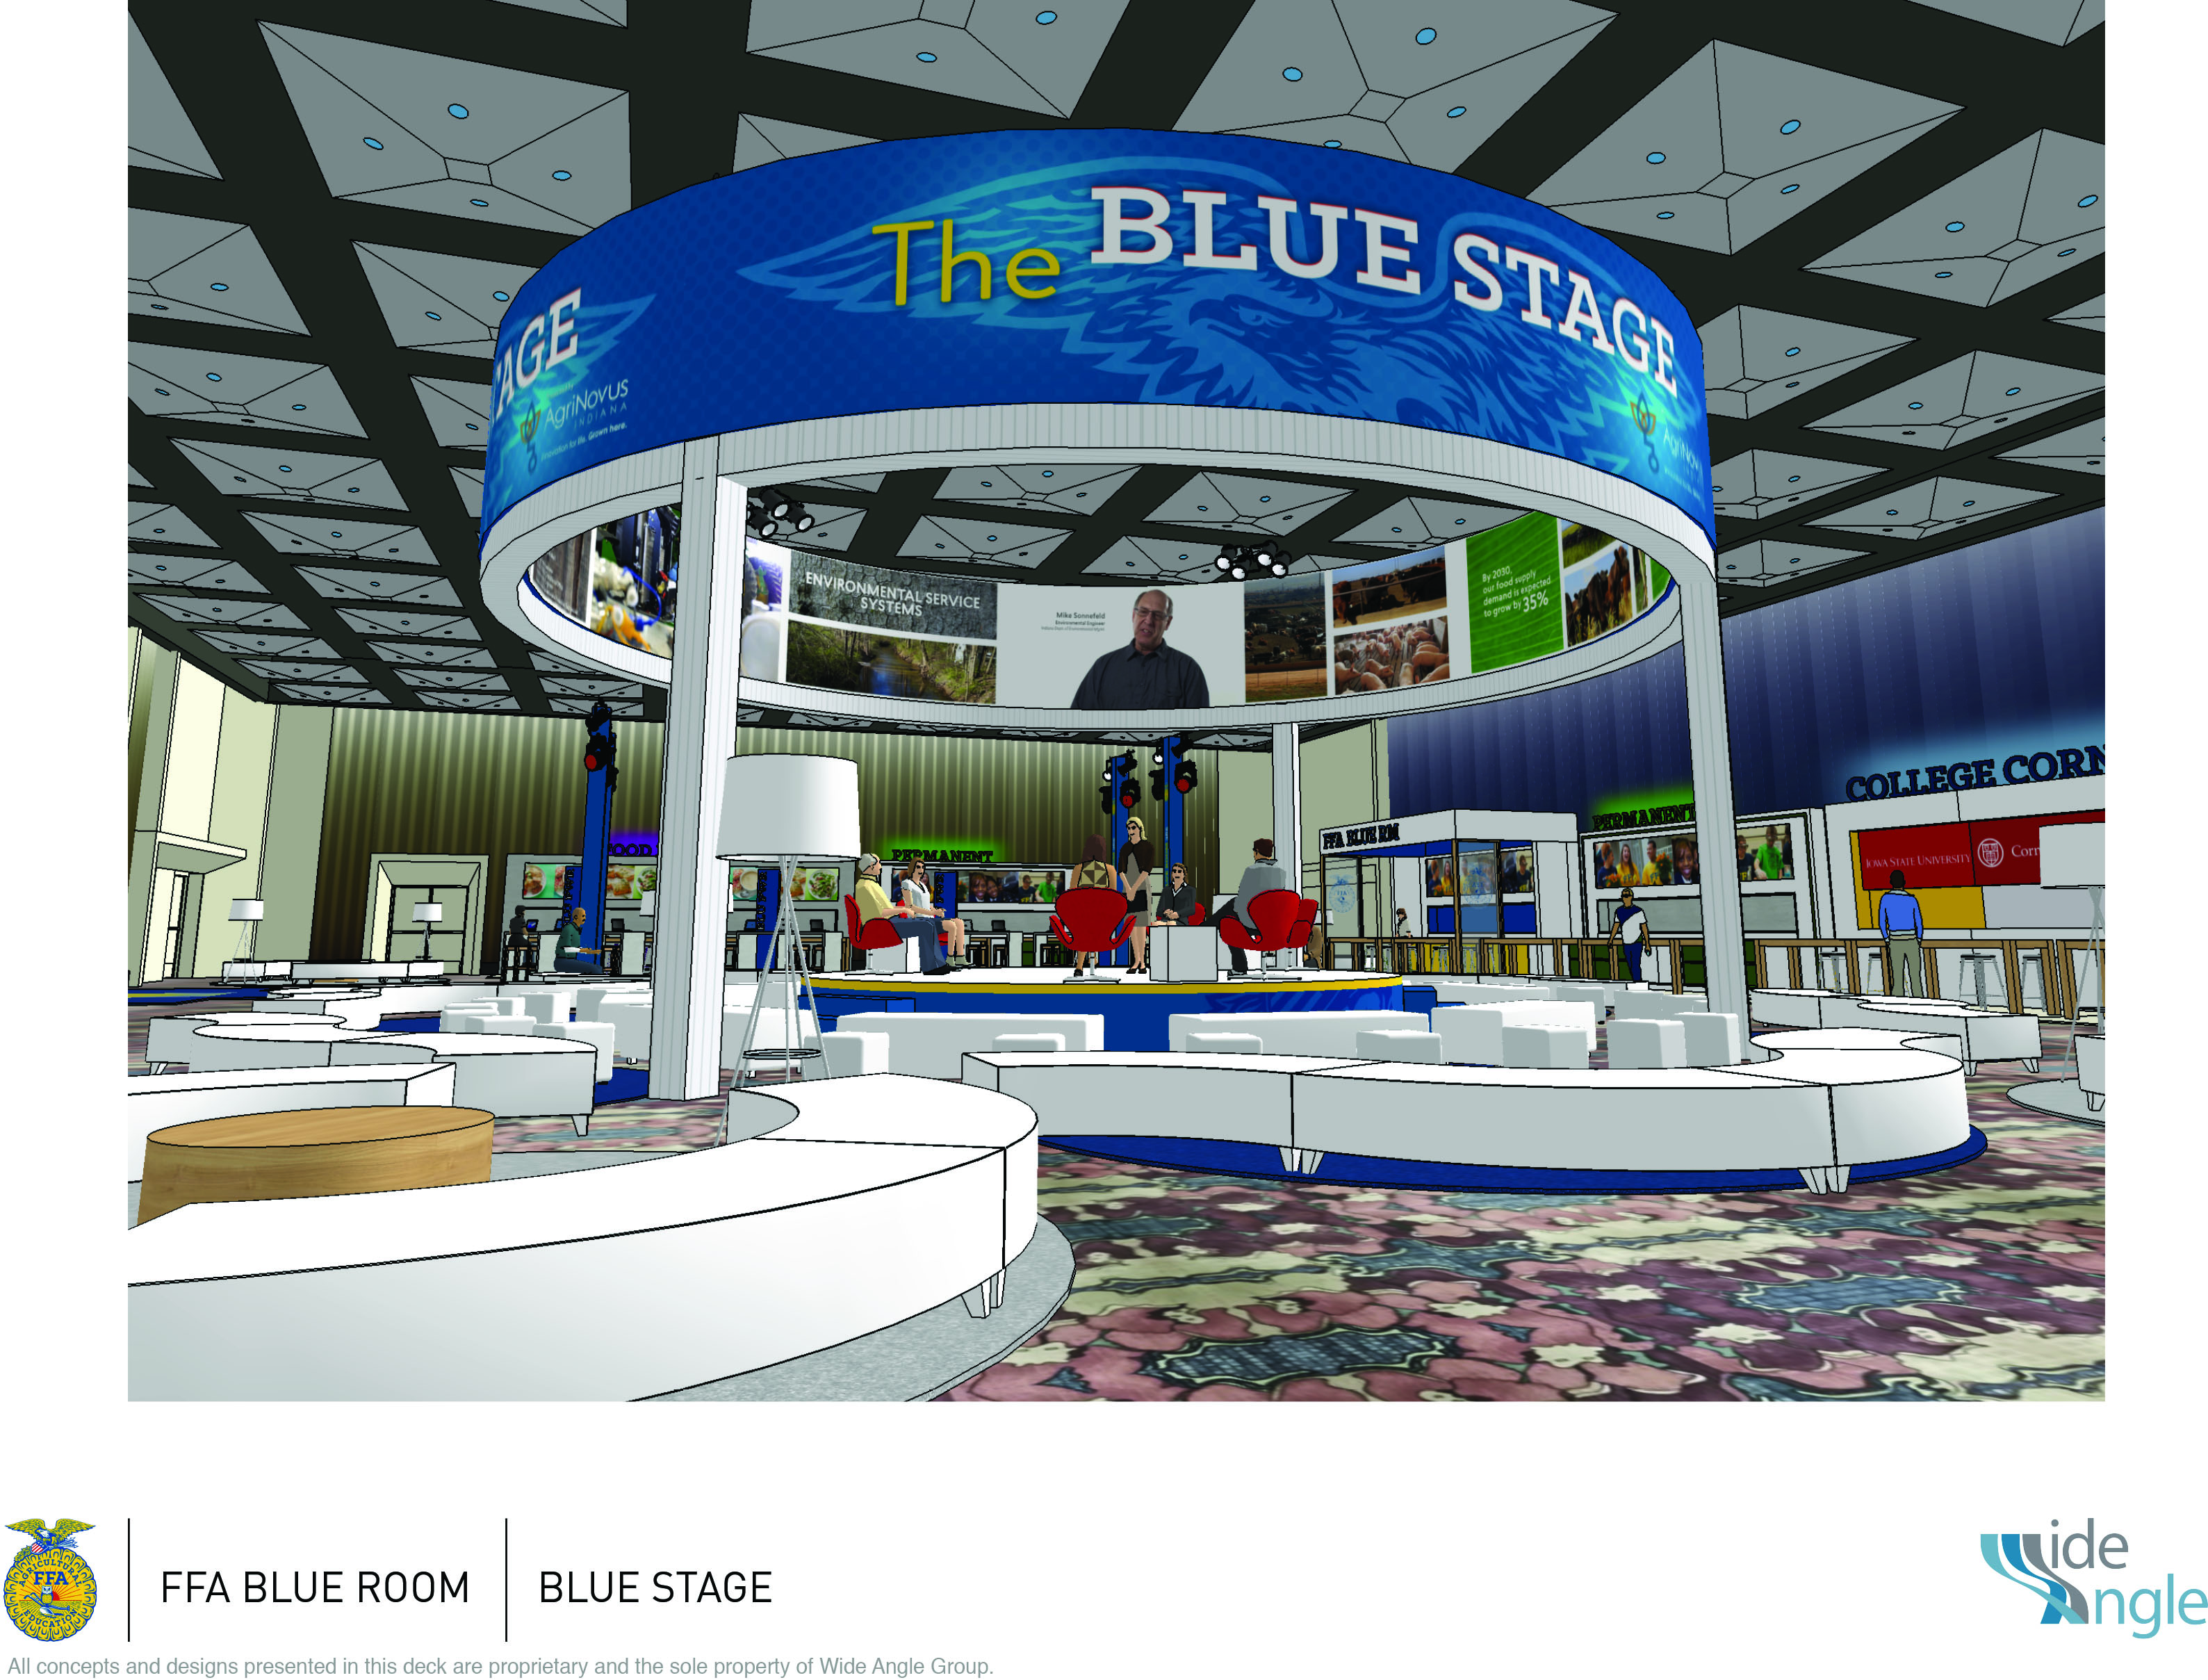 The Blue Room will offer opportunities for FFA members to delve a bit deeper into innovation and technology.